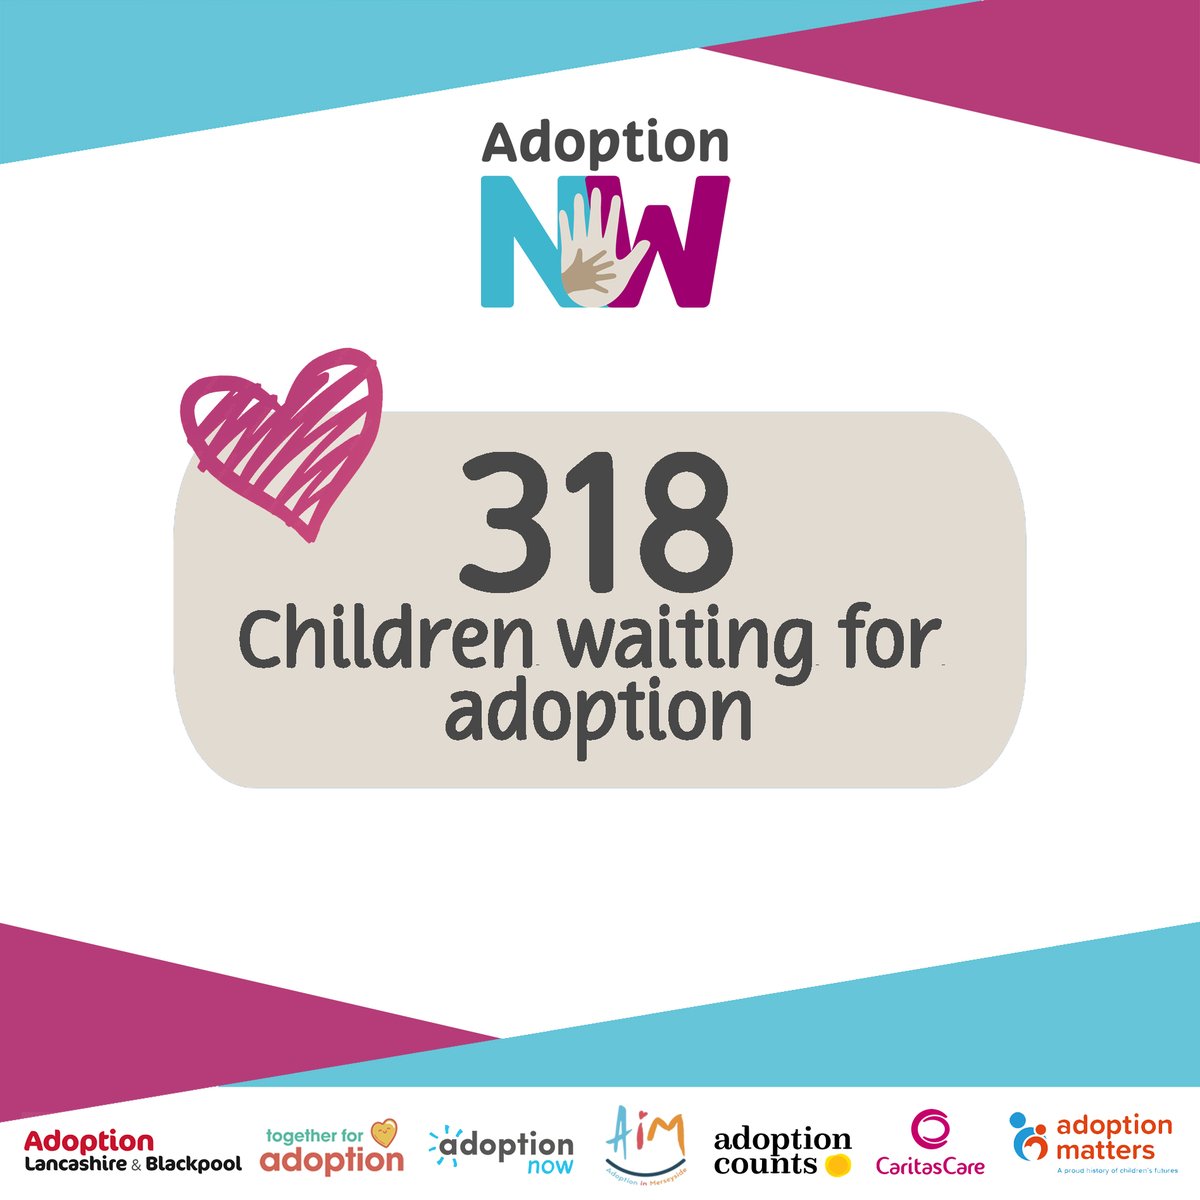 There are 318 children waiting for adoption in the North West right now. We are urging people to contact us if you are thinking about adoption and live in the region to find out more about the joys of adopting a child over 3. Find out more: orlo.uk/b67rp